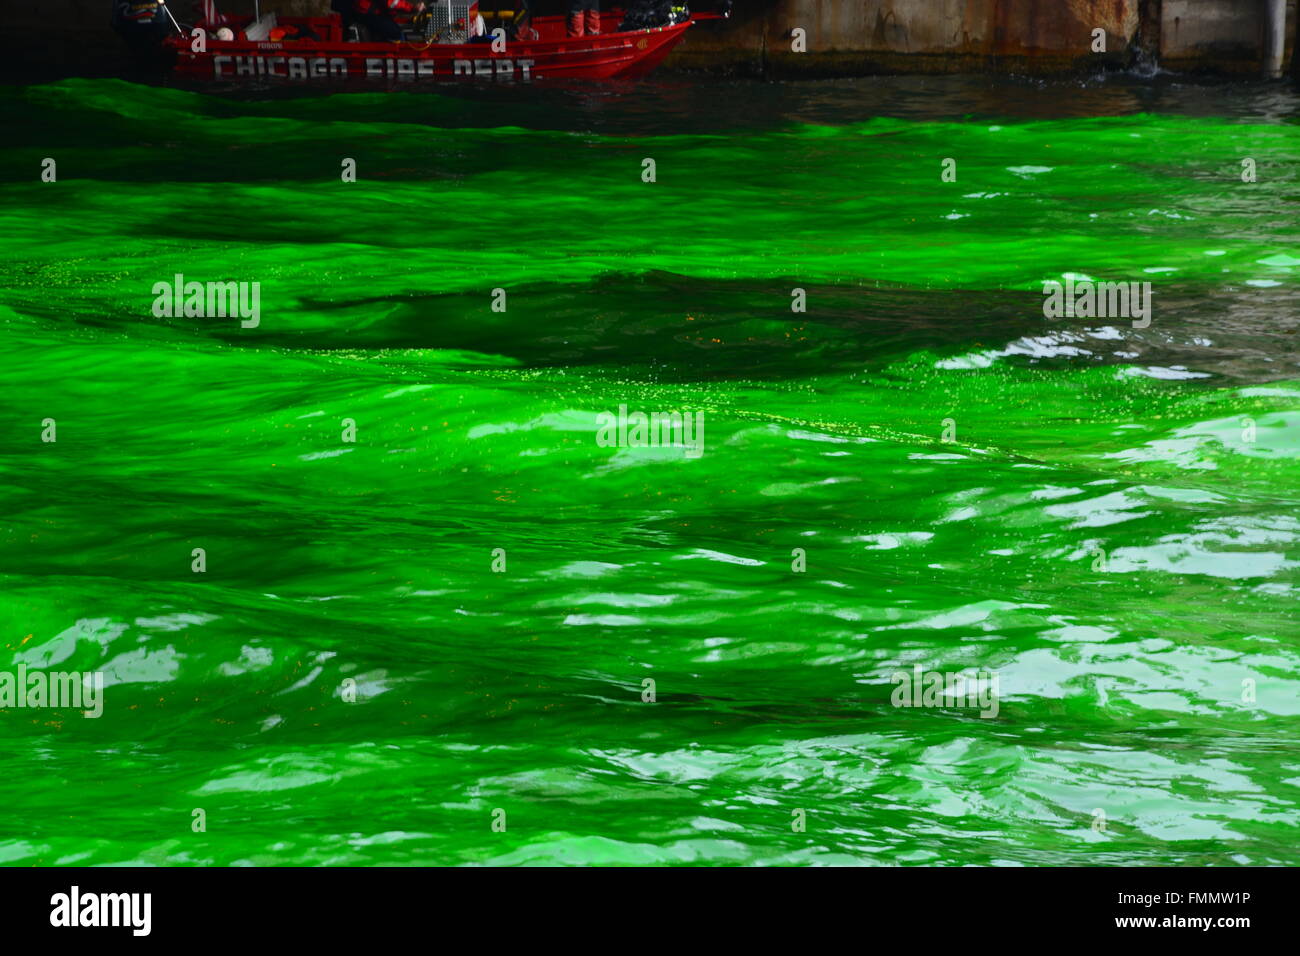 The Chicago Fire Dept divers are near during the annual dying the Chicago River green for St. Patrick's Day, 3/12/2016 Stock Photo